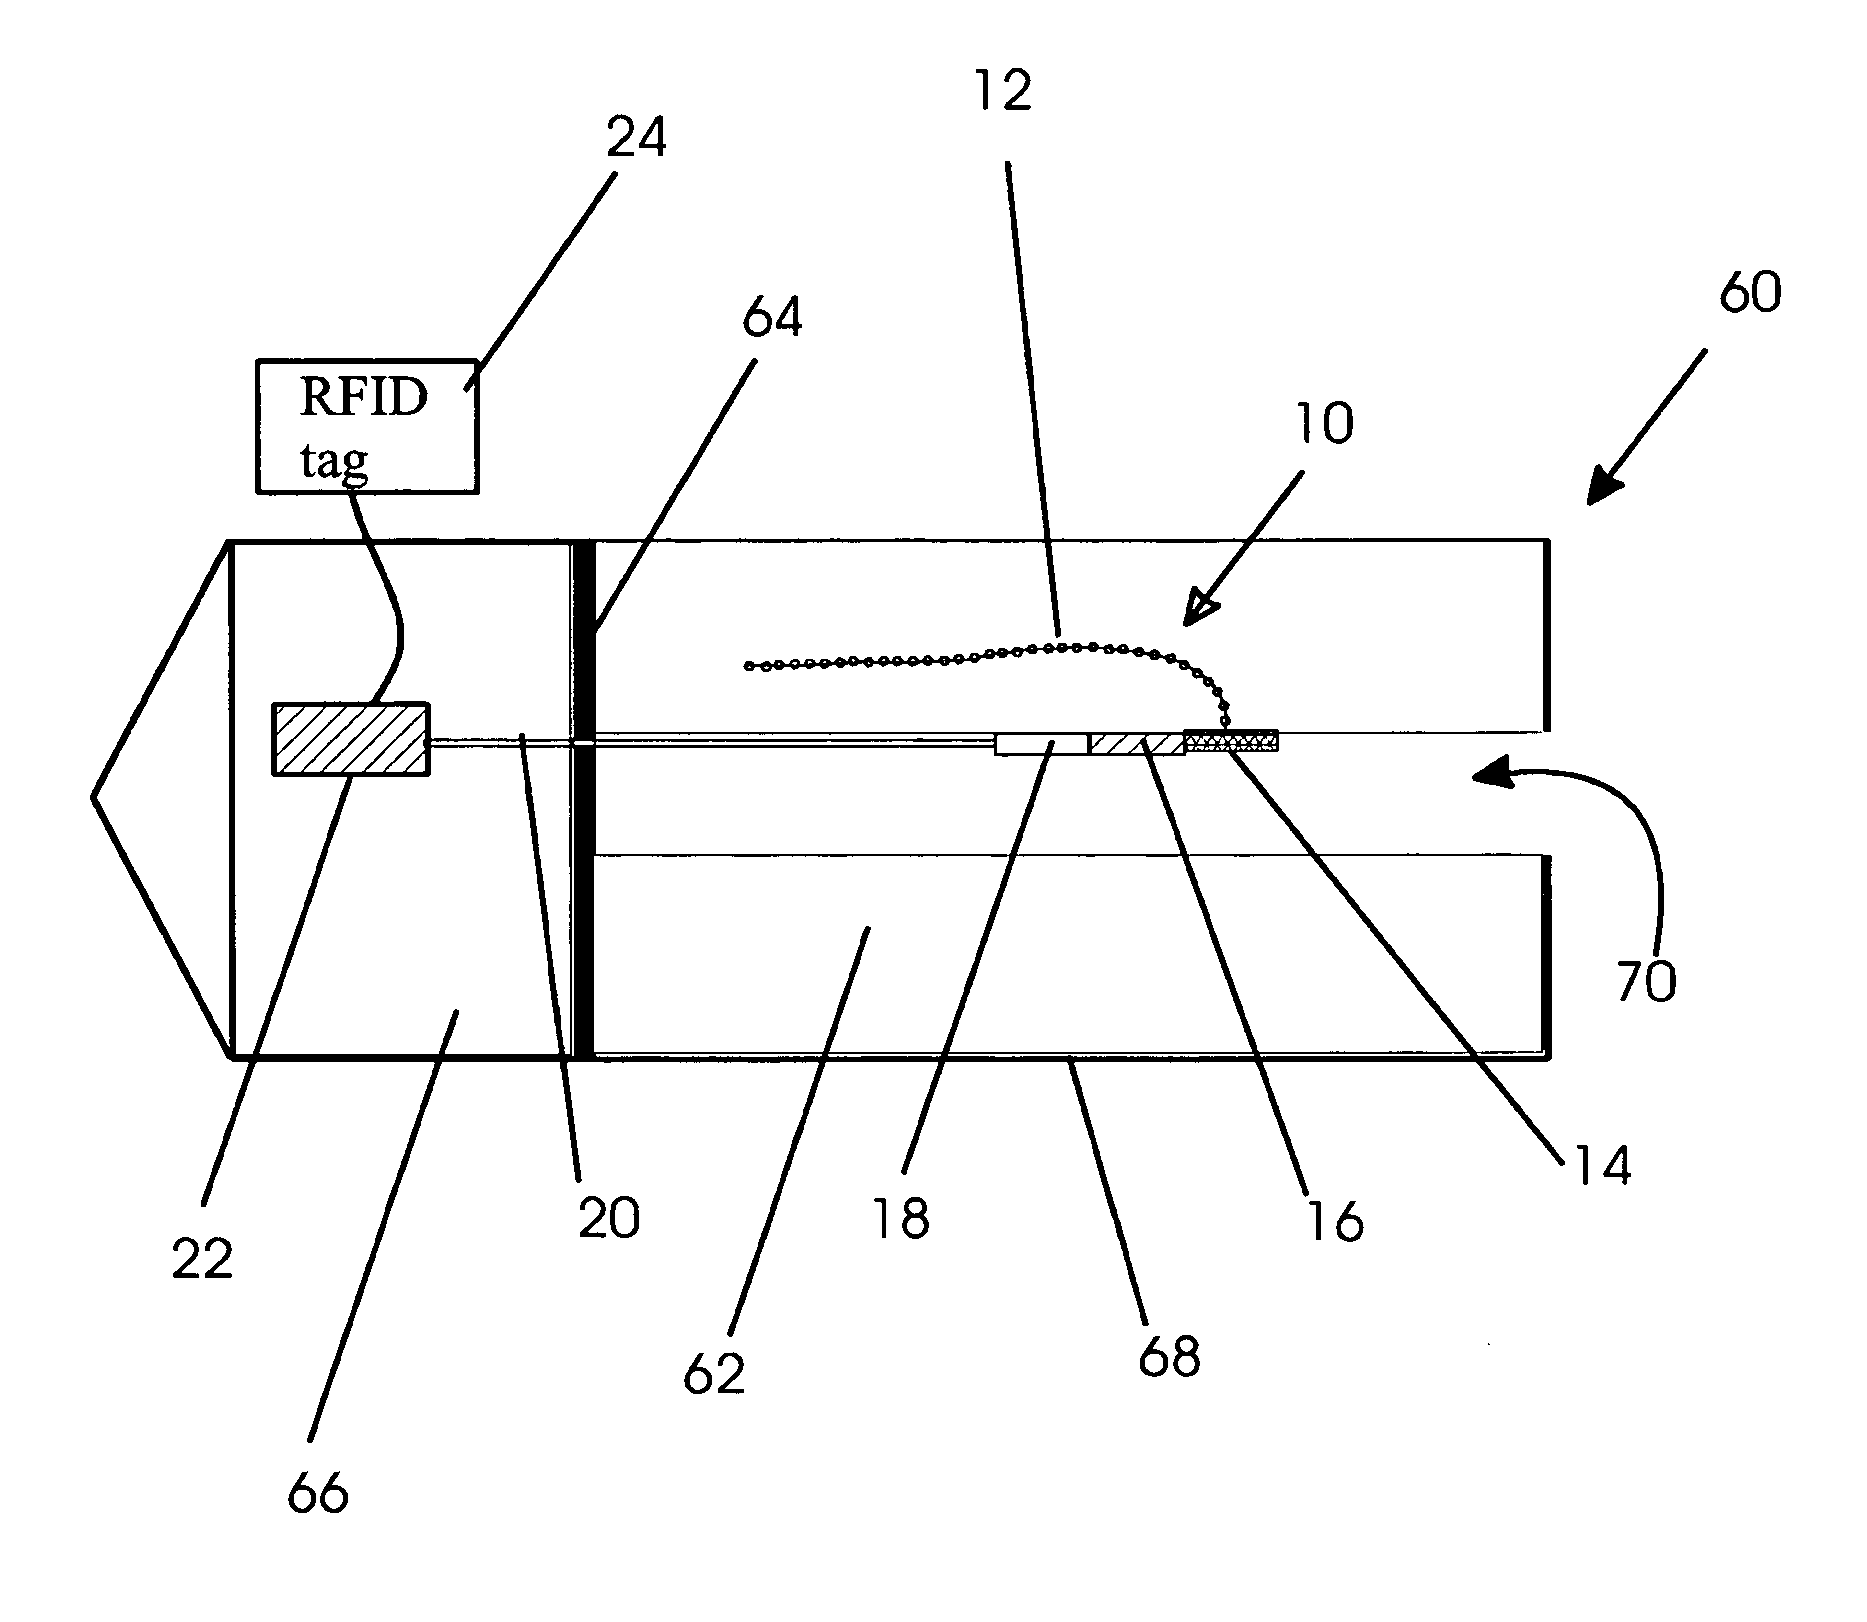 Apparatus for measuring the health of solid rocket propellant using an embedded sensor